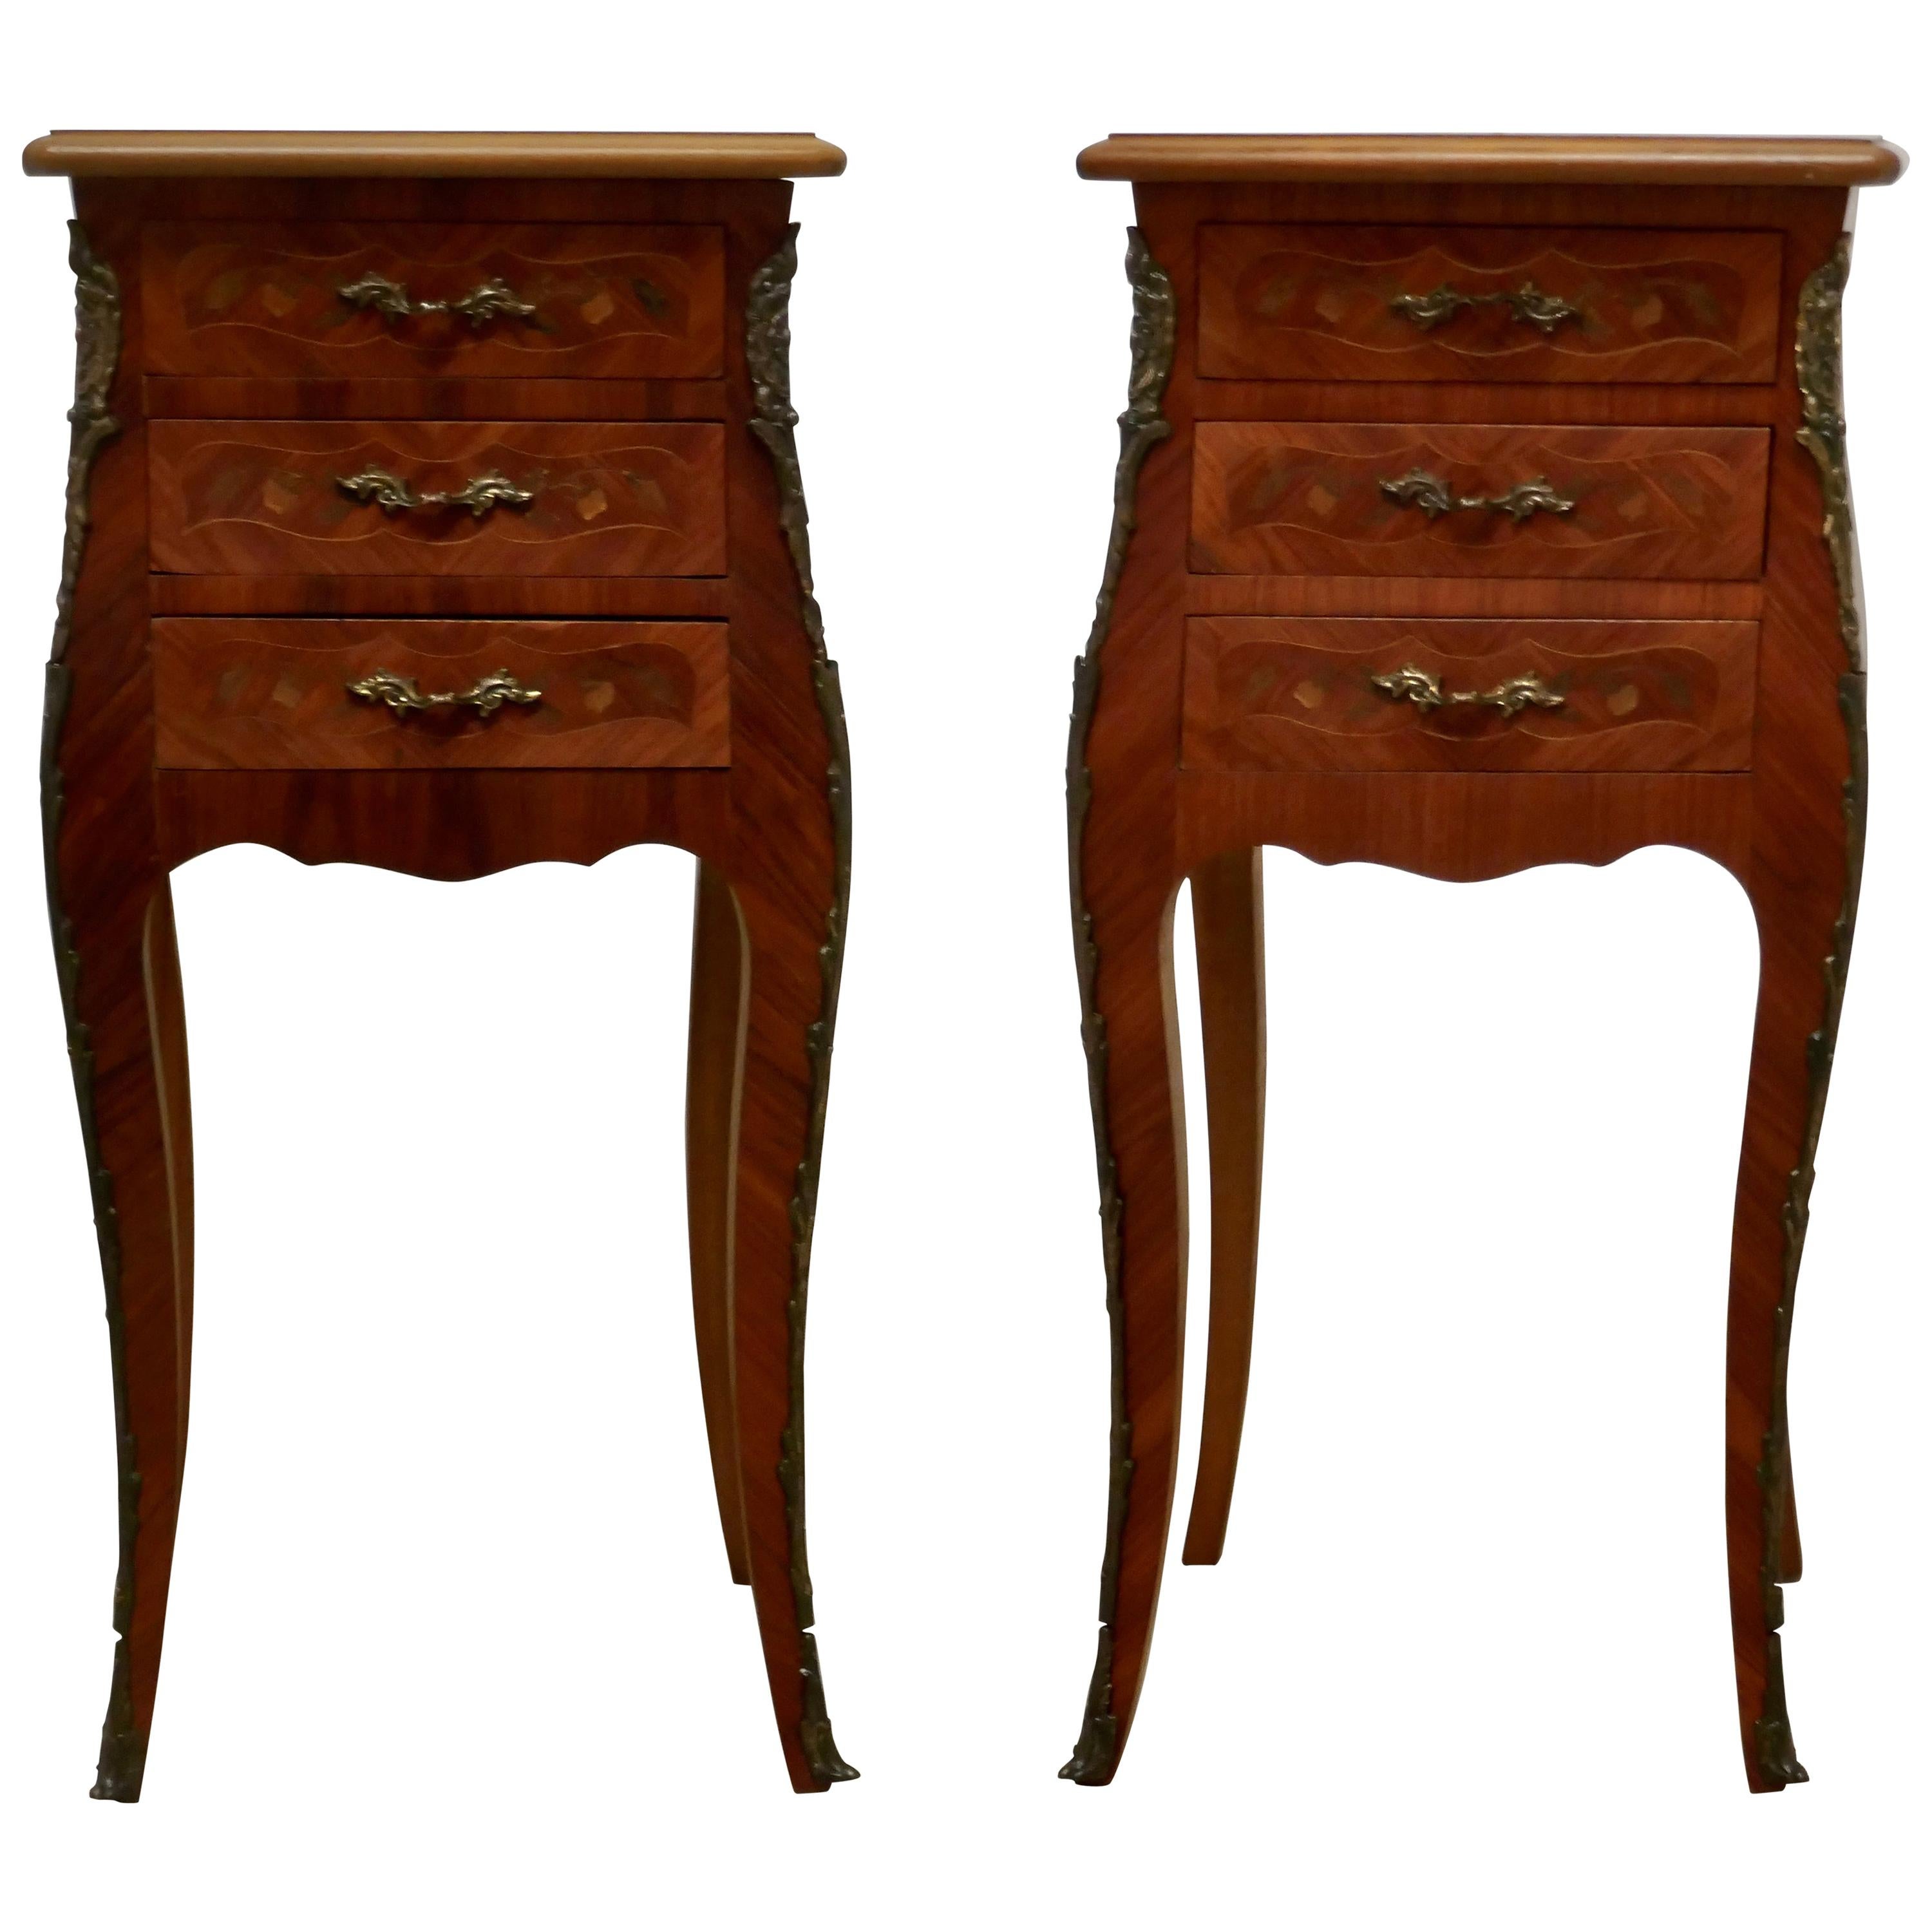 Pair of Inlaid French Marquetry Bombe Shaped Bedside Cupboards